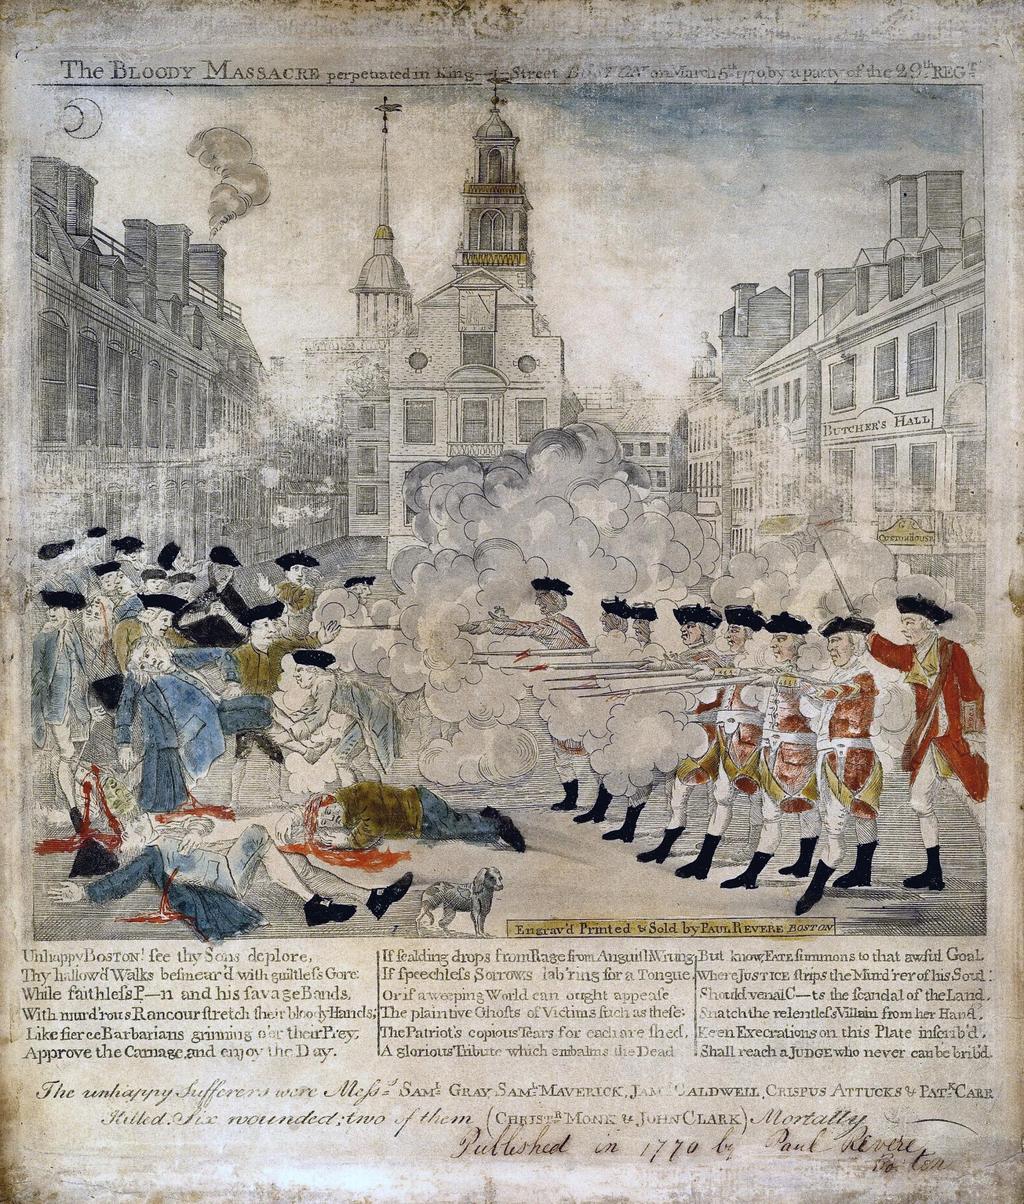 1768: Britain sent regiments to Boston to help enforce the new acts and quell the resistance 1770: crowds gathered outside the Custom House and hurled